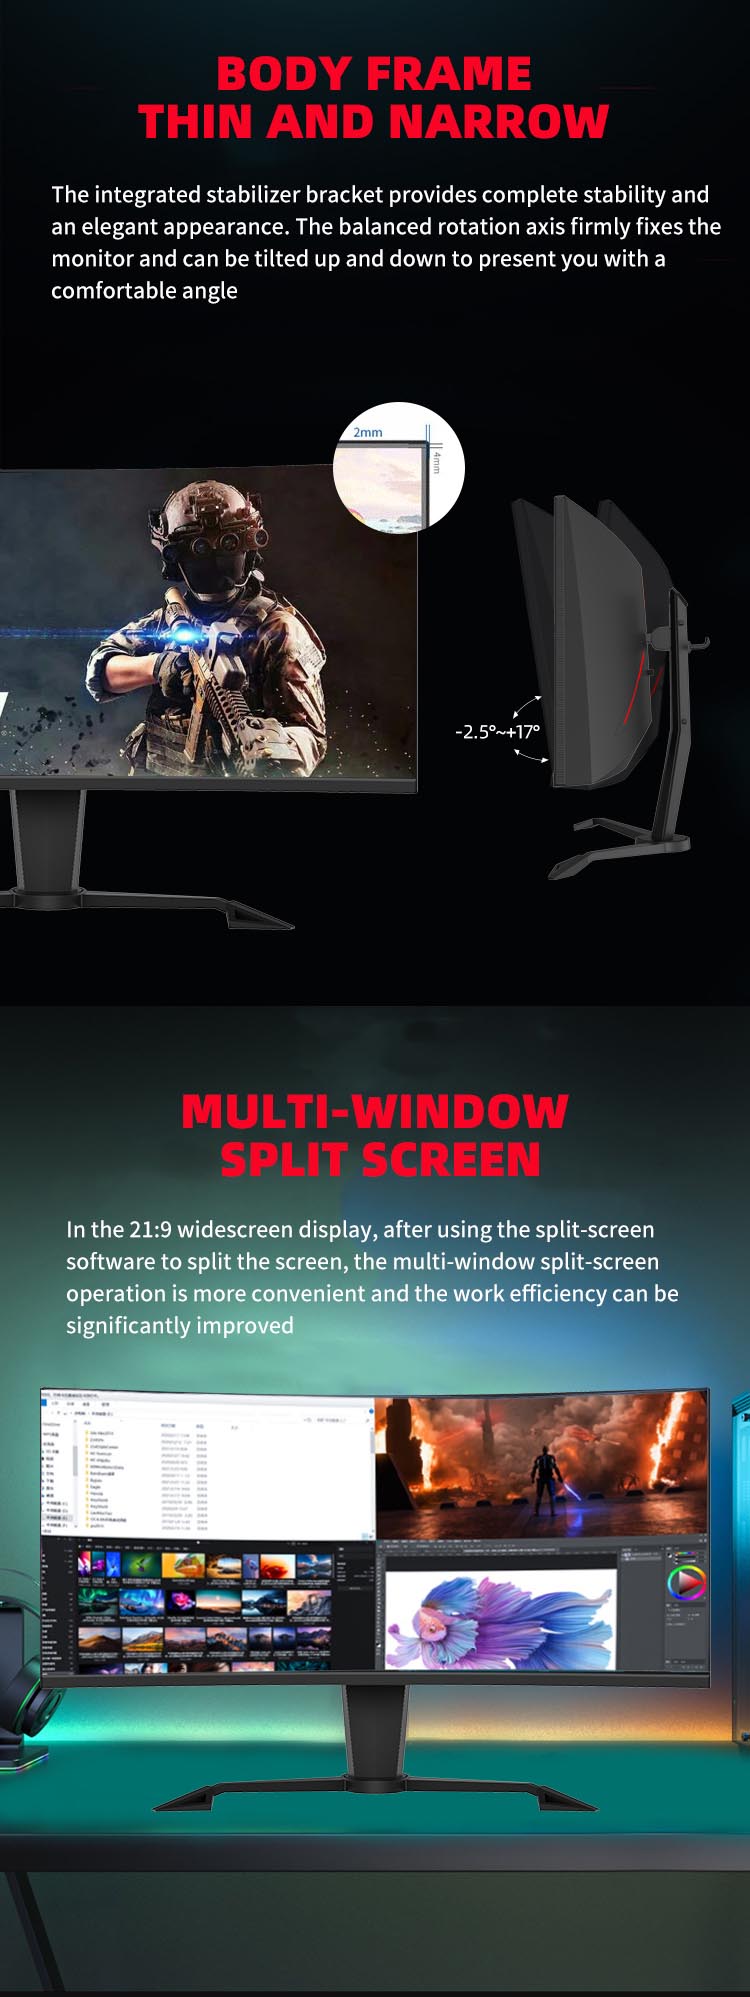 , Ultrawide 21:9 34 inch 3440&#215;1440 144Hz LED Curved Gaming Monitor